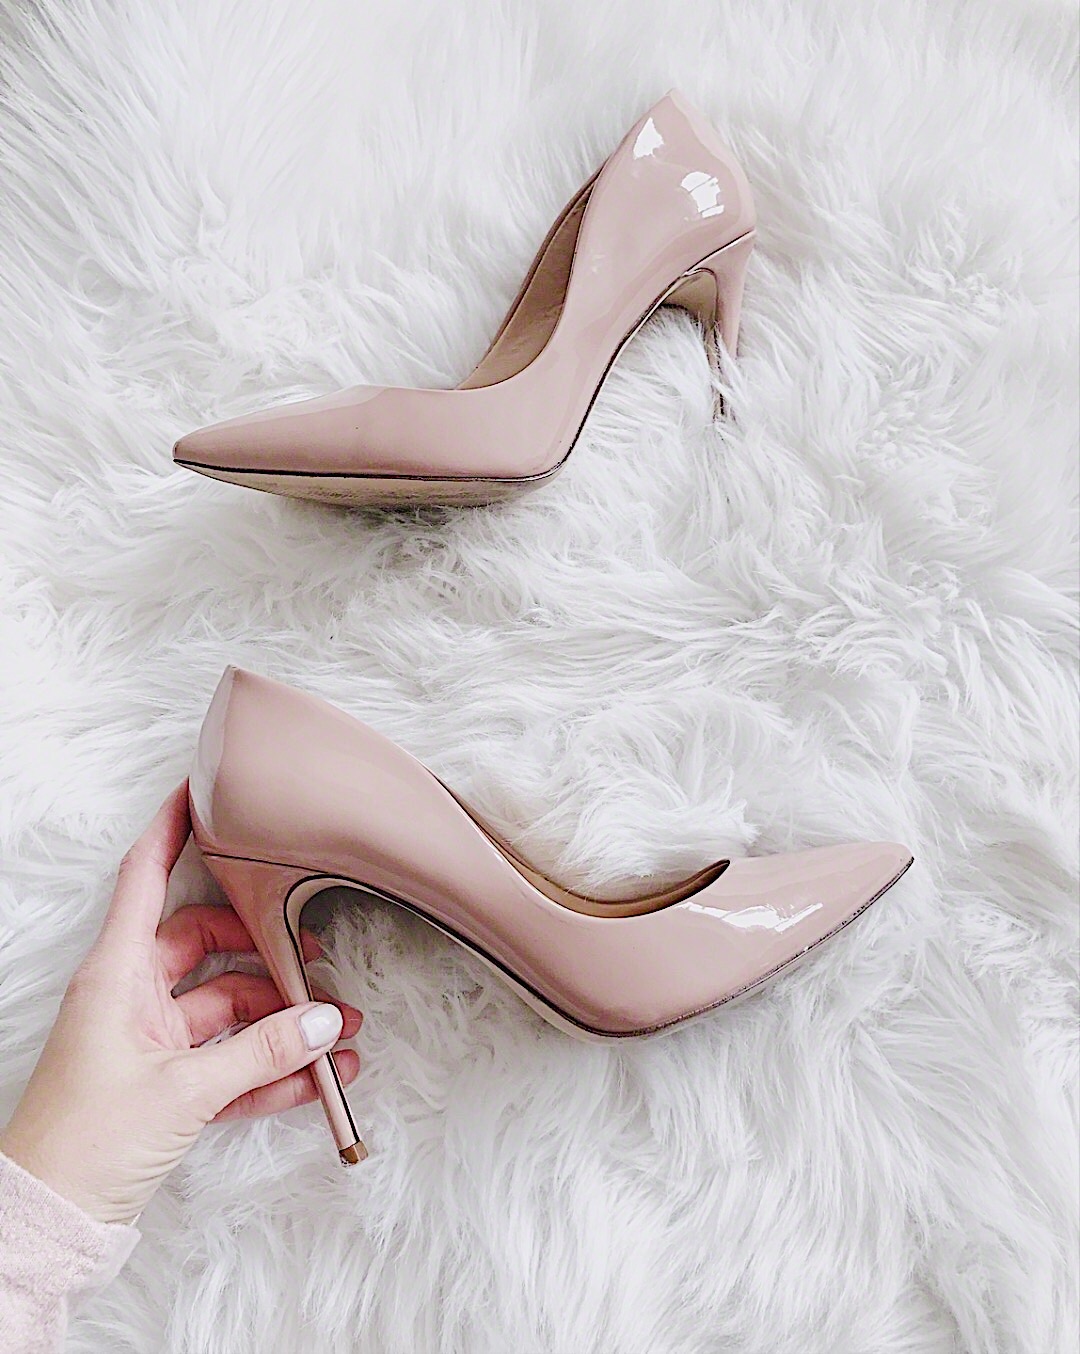 nude patent leather pumps